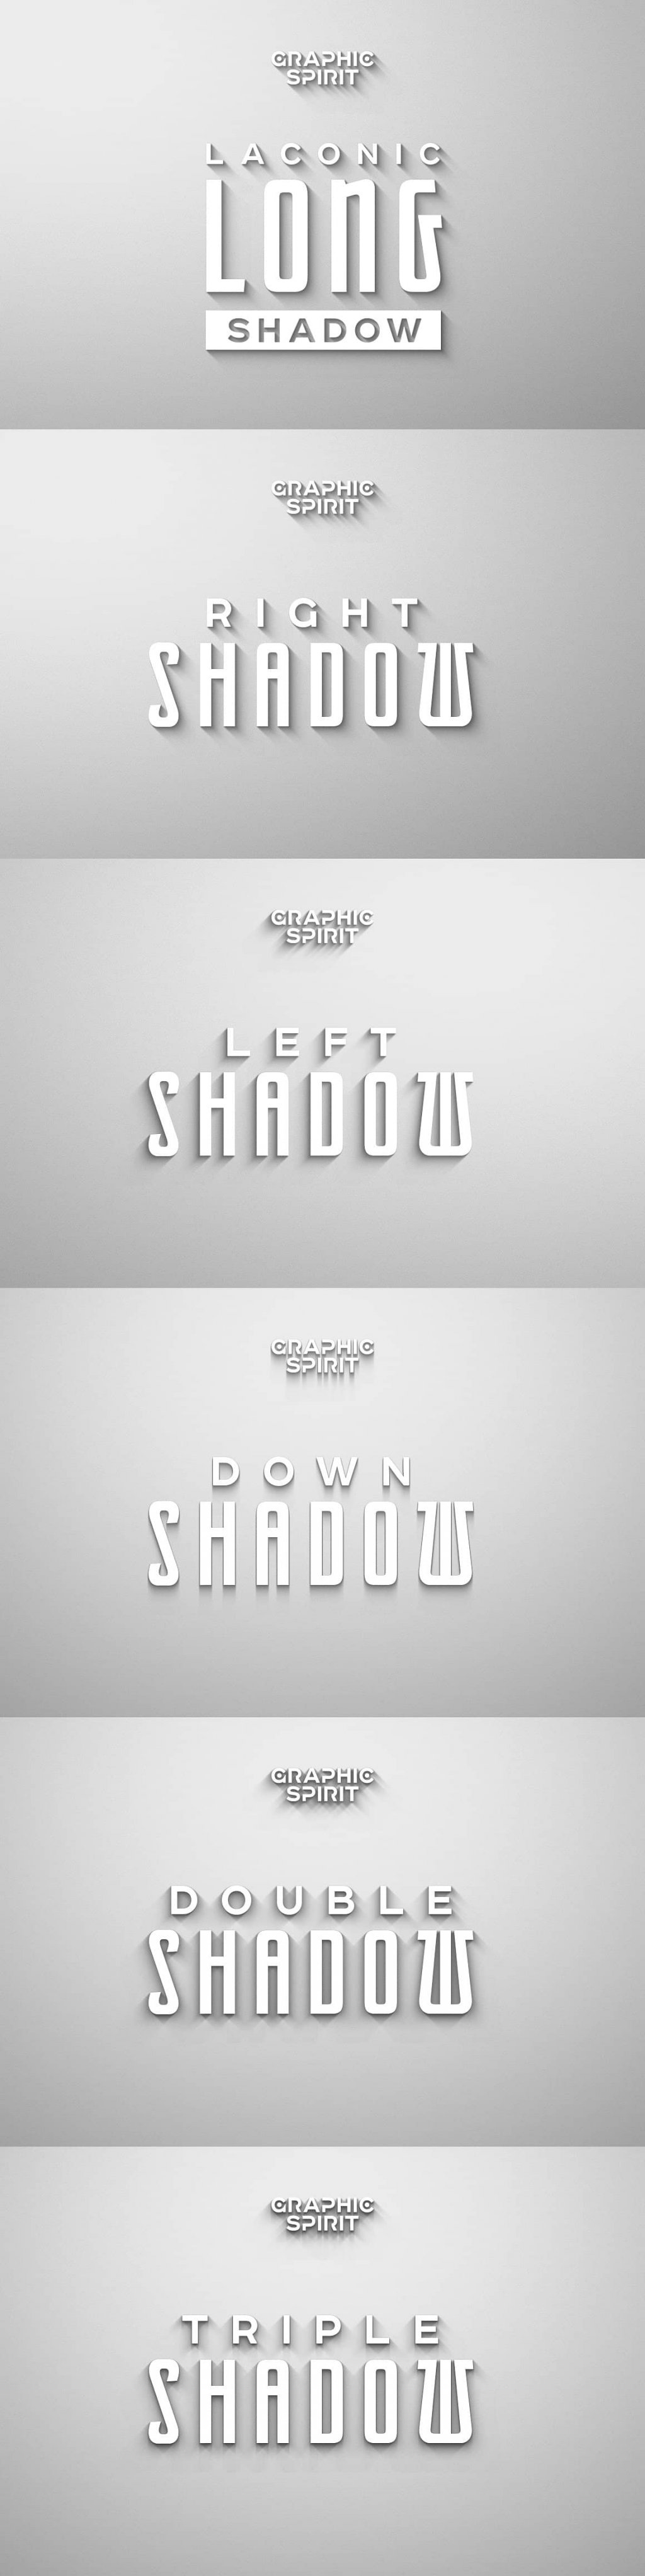 Laconic Long Shadow for Photoshop